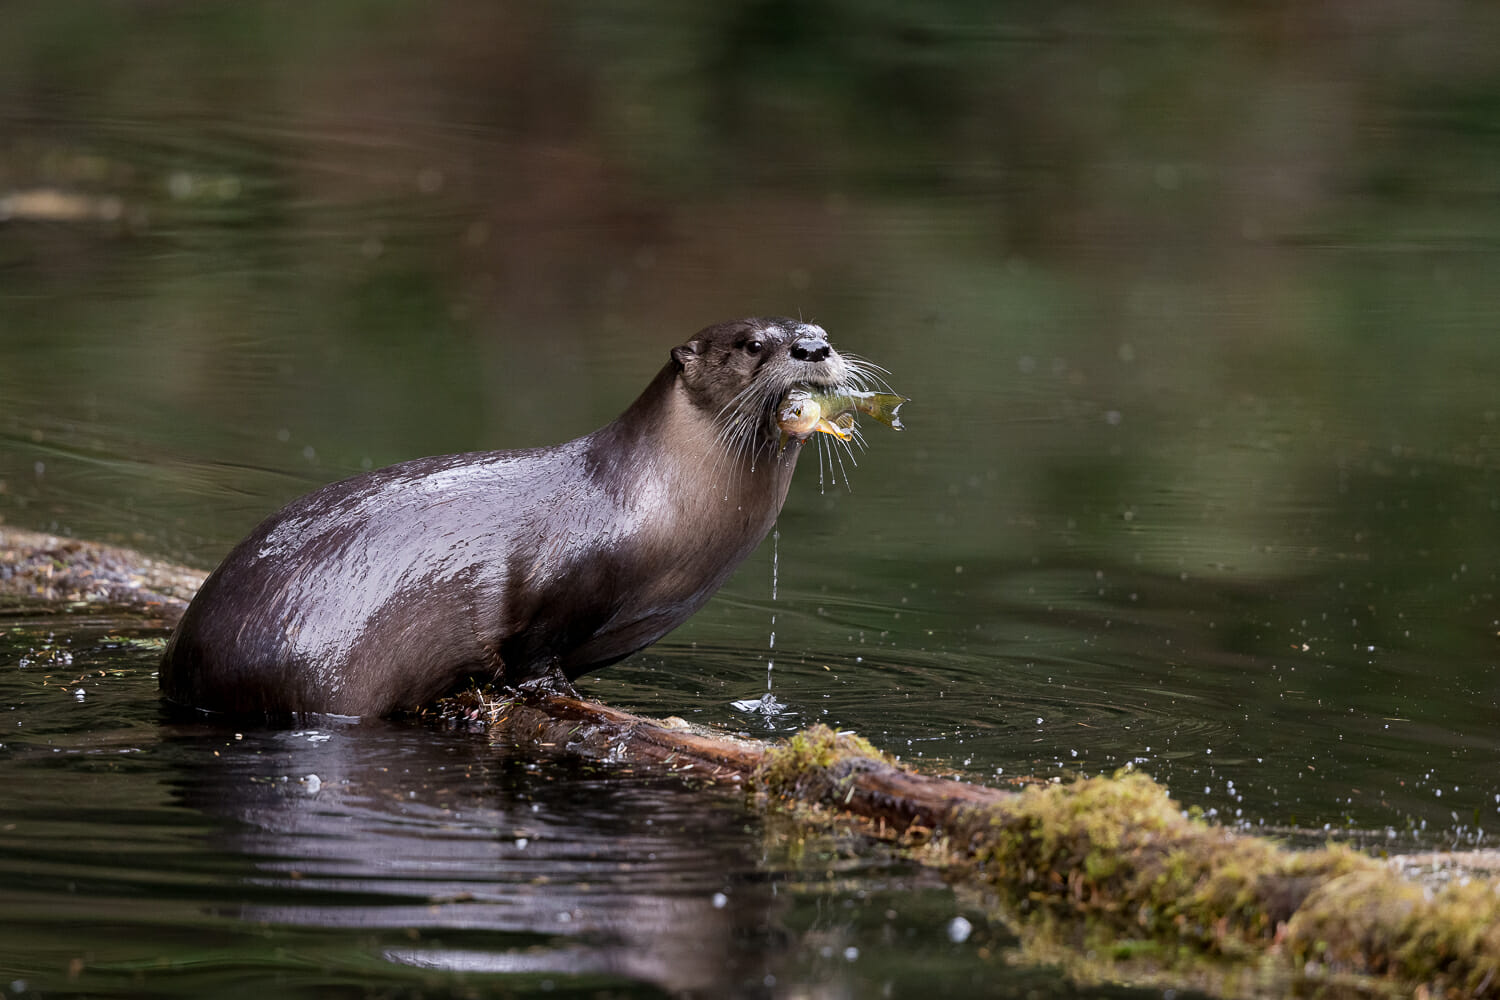 north american river otter with freshly caught fish in its mouth